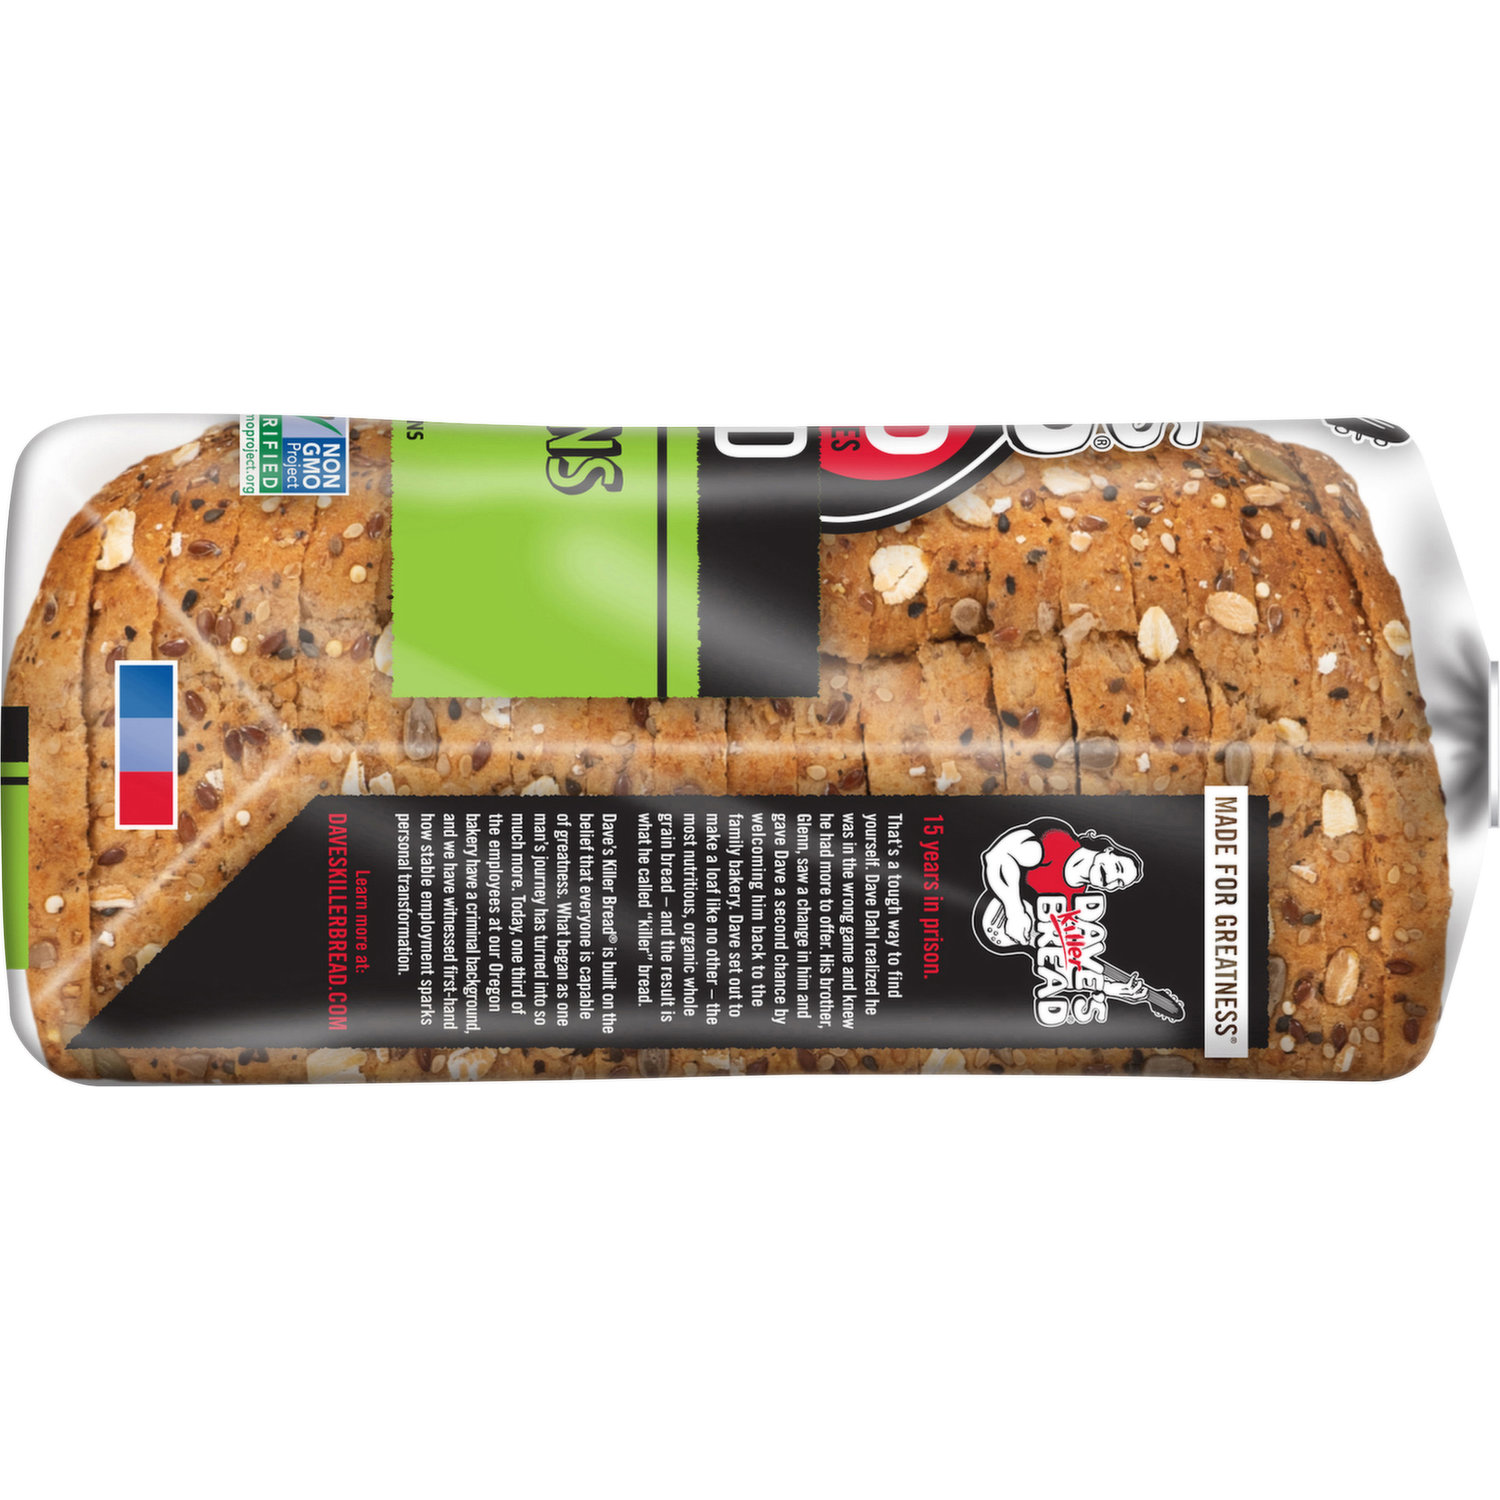 Dave's Killer Bread Bread, Organic, 21 Whole Grains and Seeds 